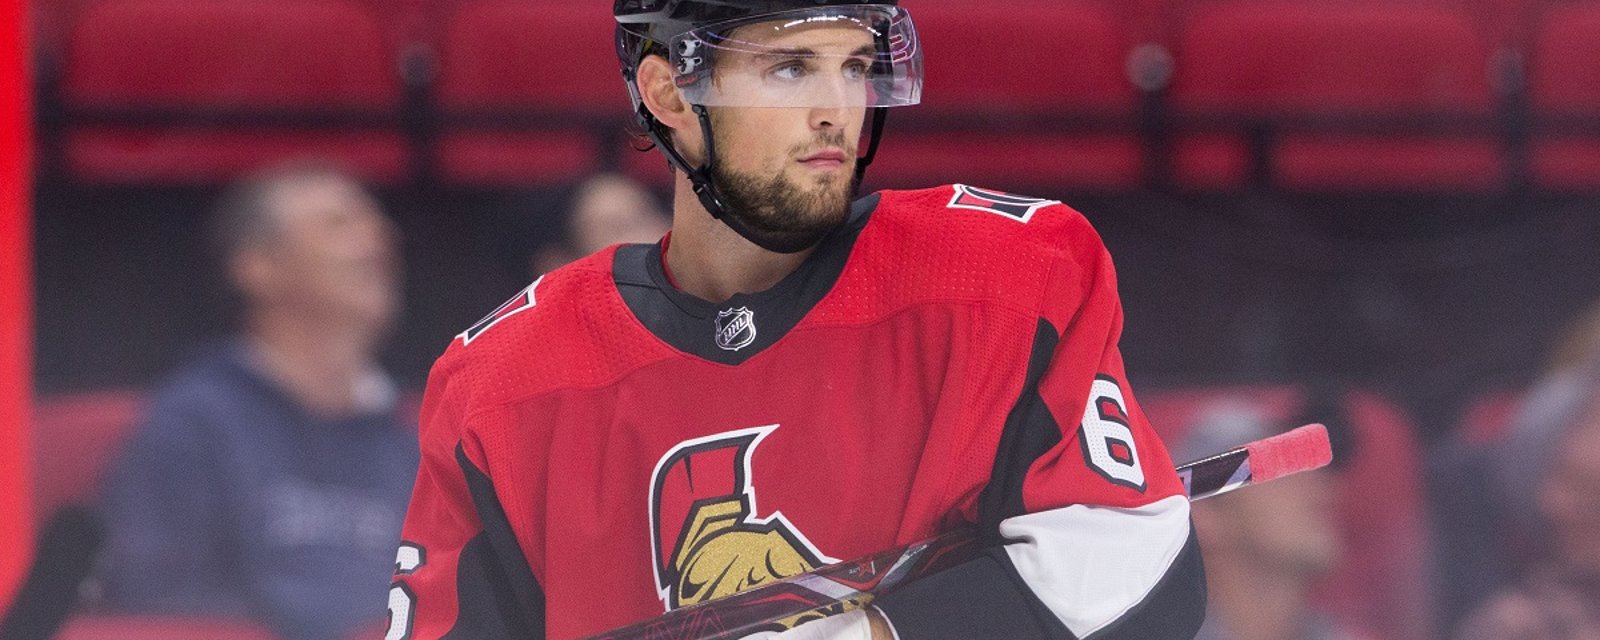 Breaking: Chris Wideman pulled out of practice, informed he has been traded.